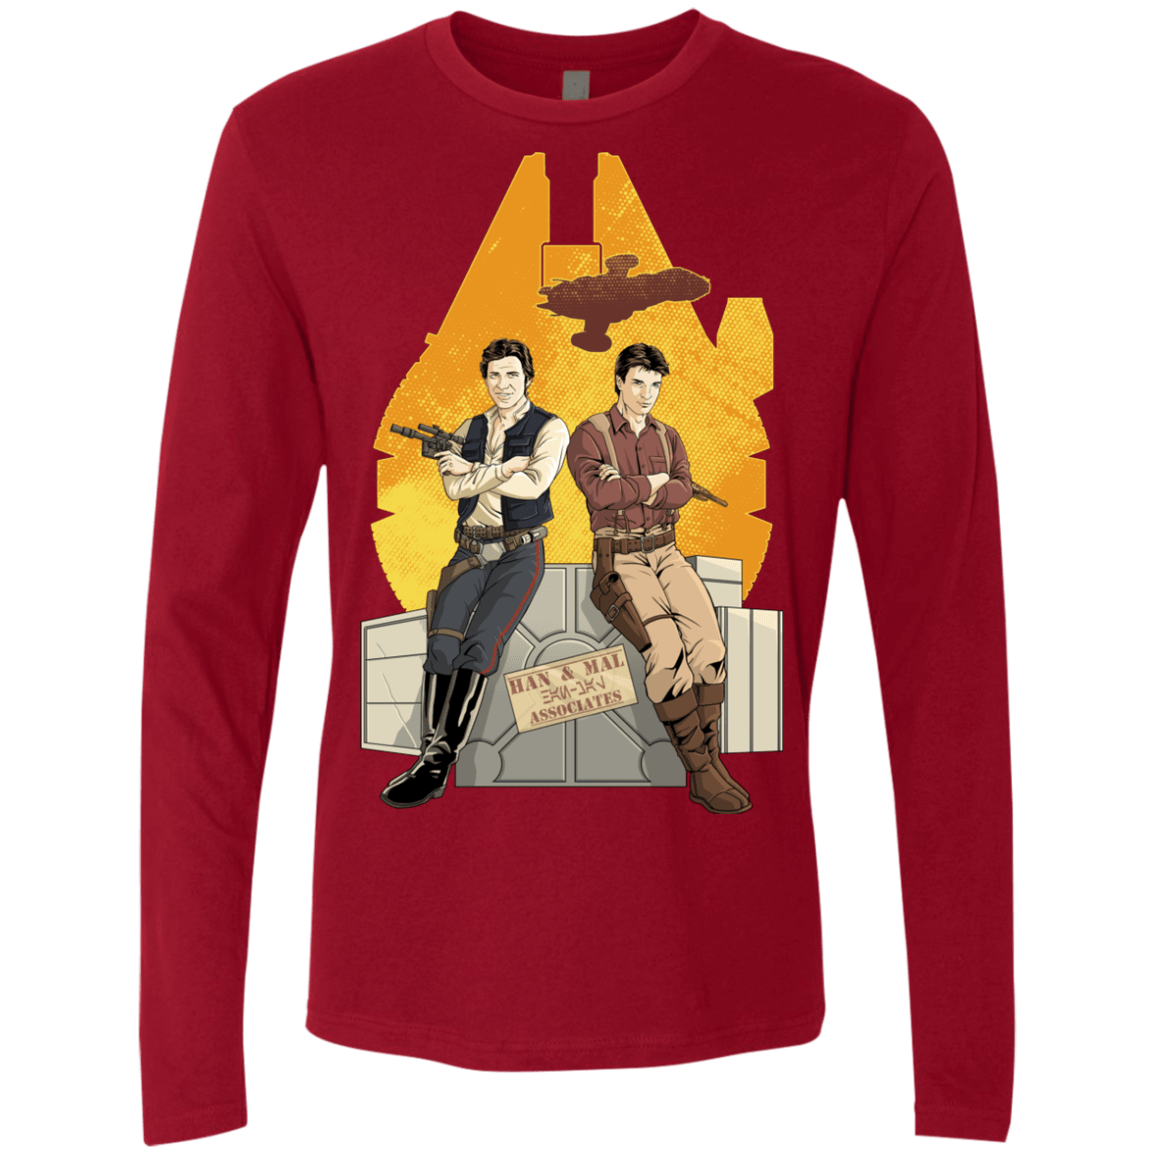 T-Shirts Cardinal / Small Partners In Crime Men's Premium Long Sleeve